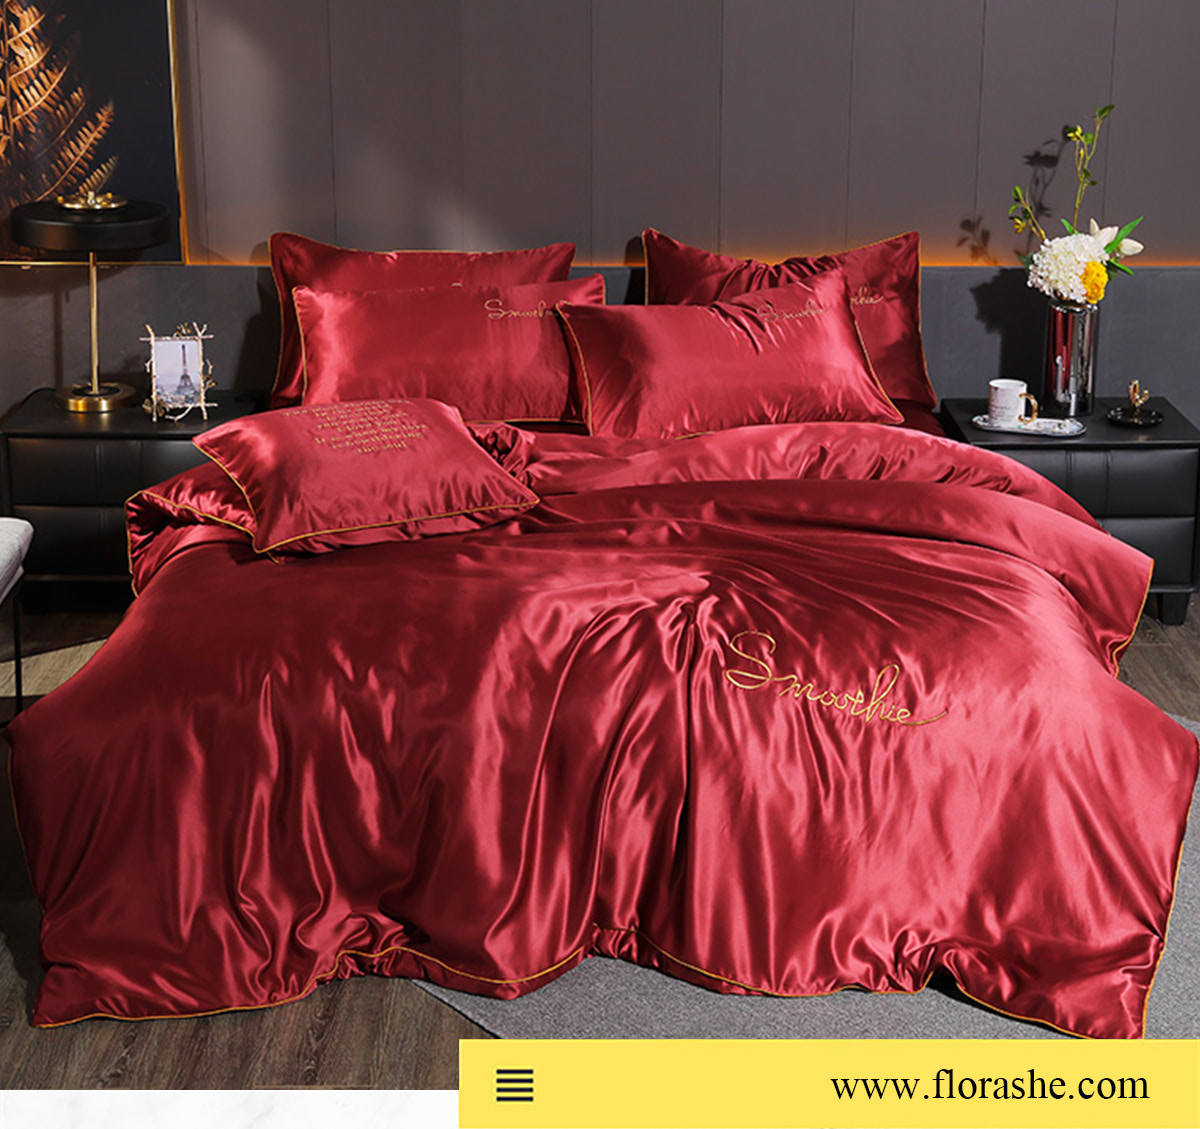 Sexy-Solid-Color-Silky-Satin-Duvet-Cover-Bedding-Set-4-Pcs11